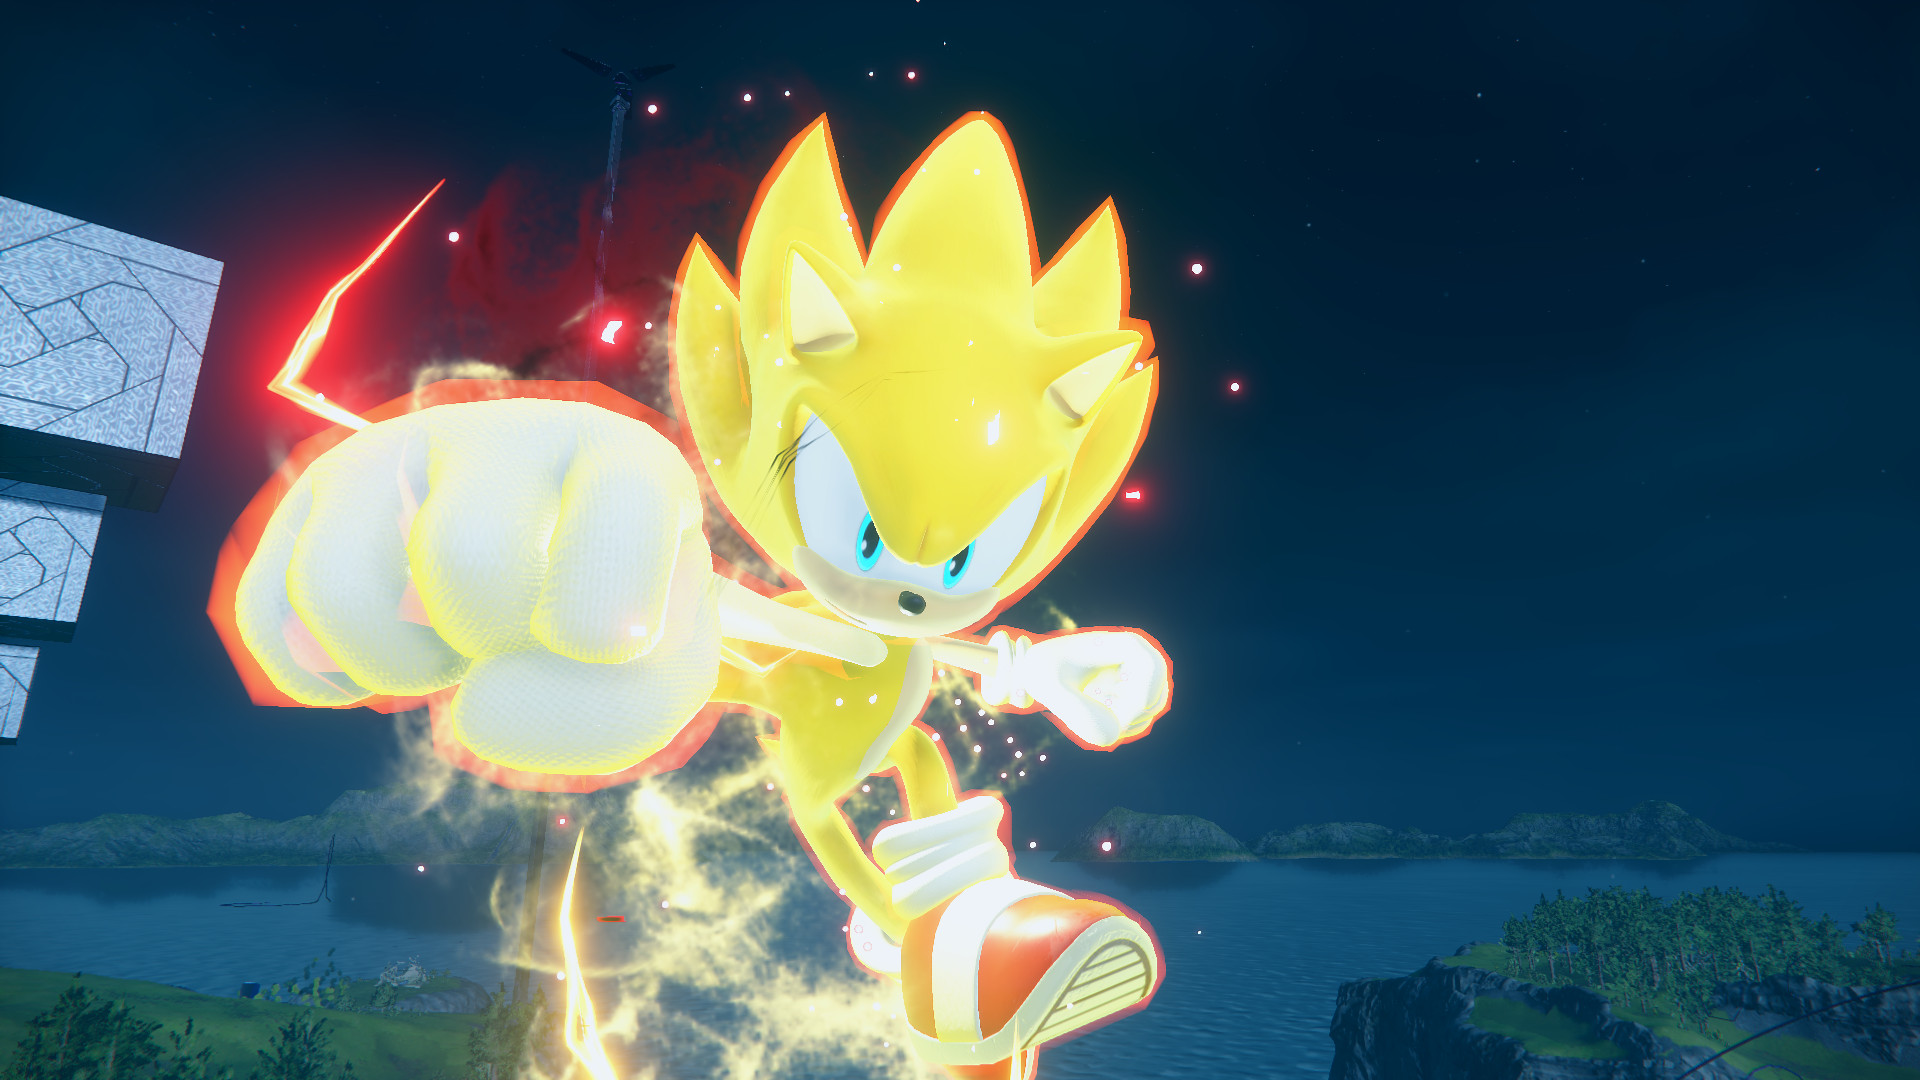 A custom made super tails animation based on the egg reverie